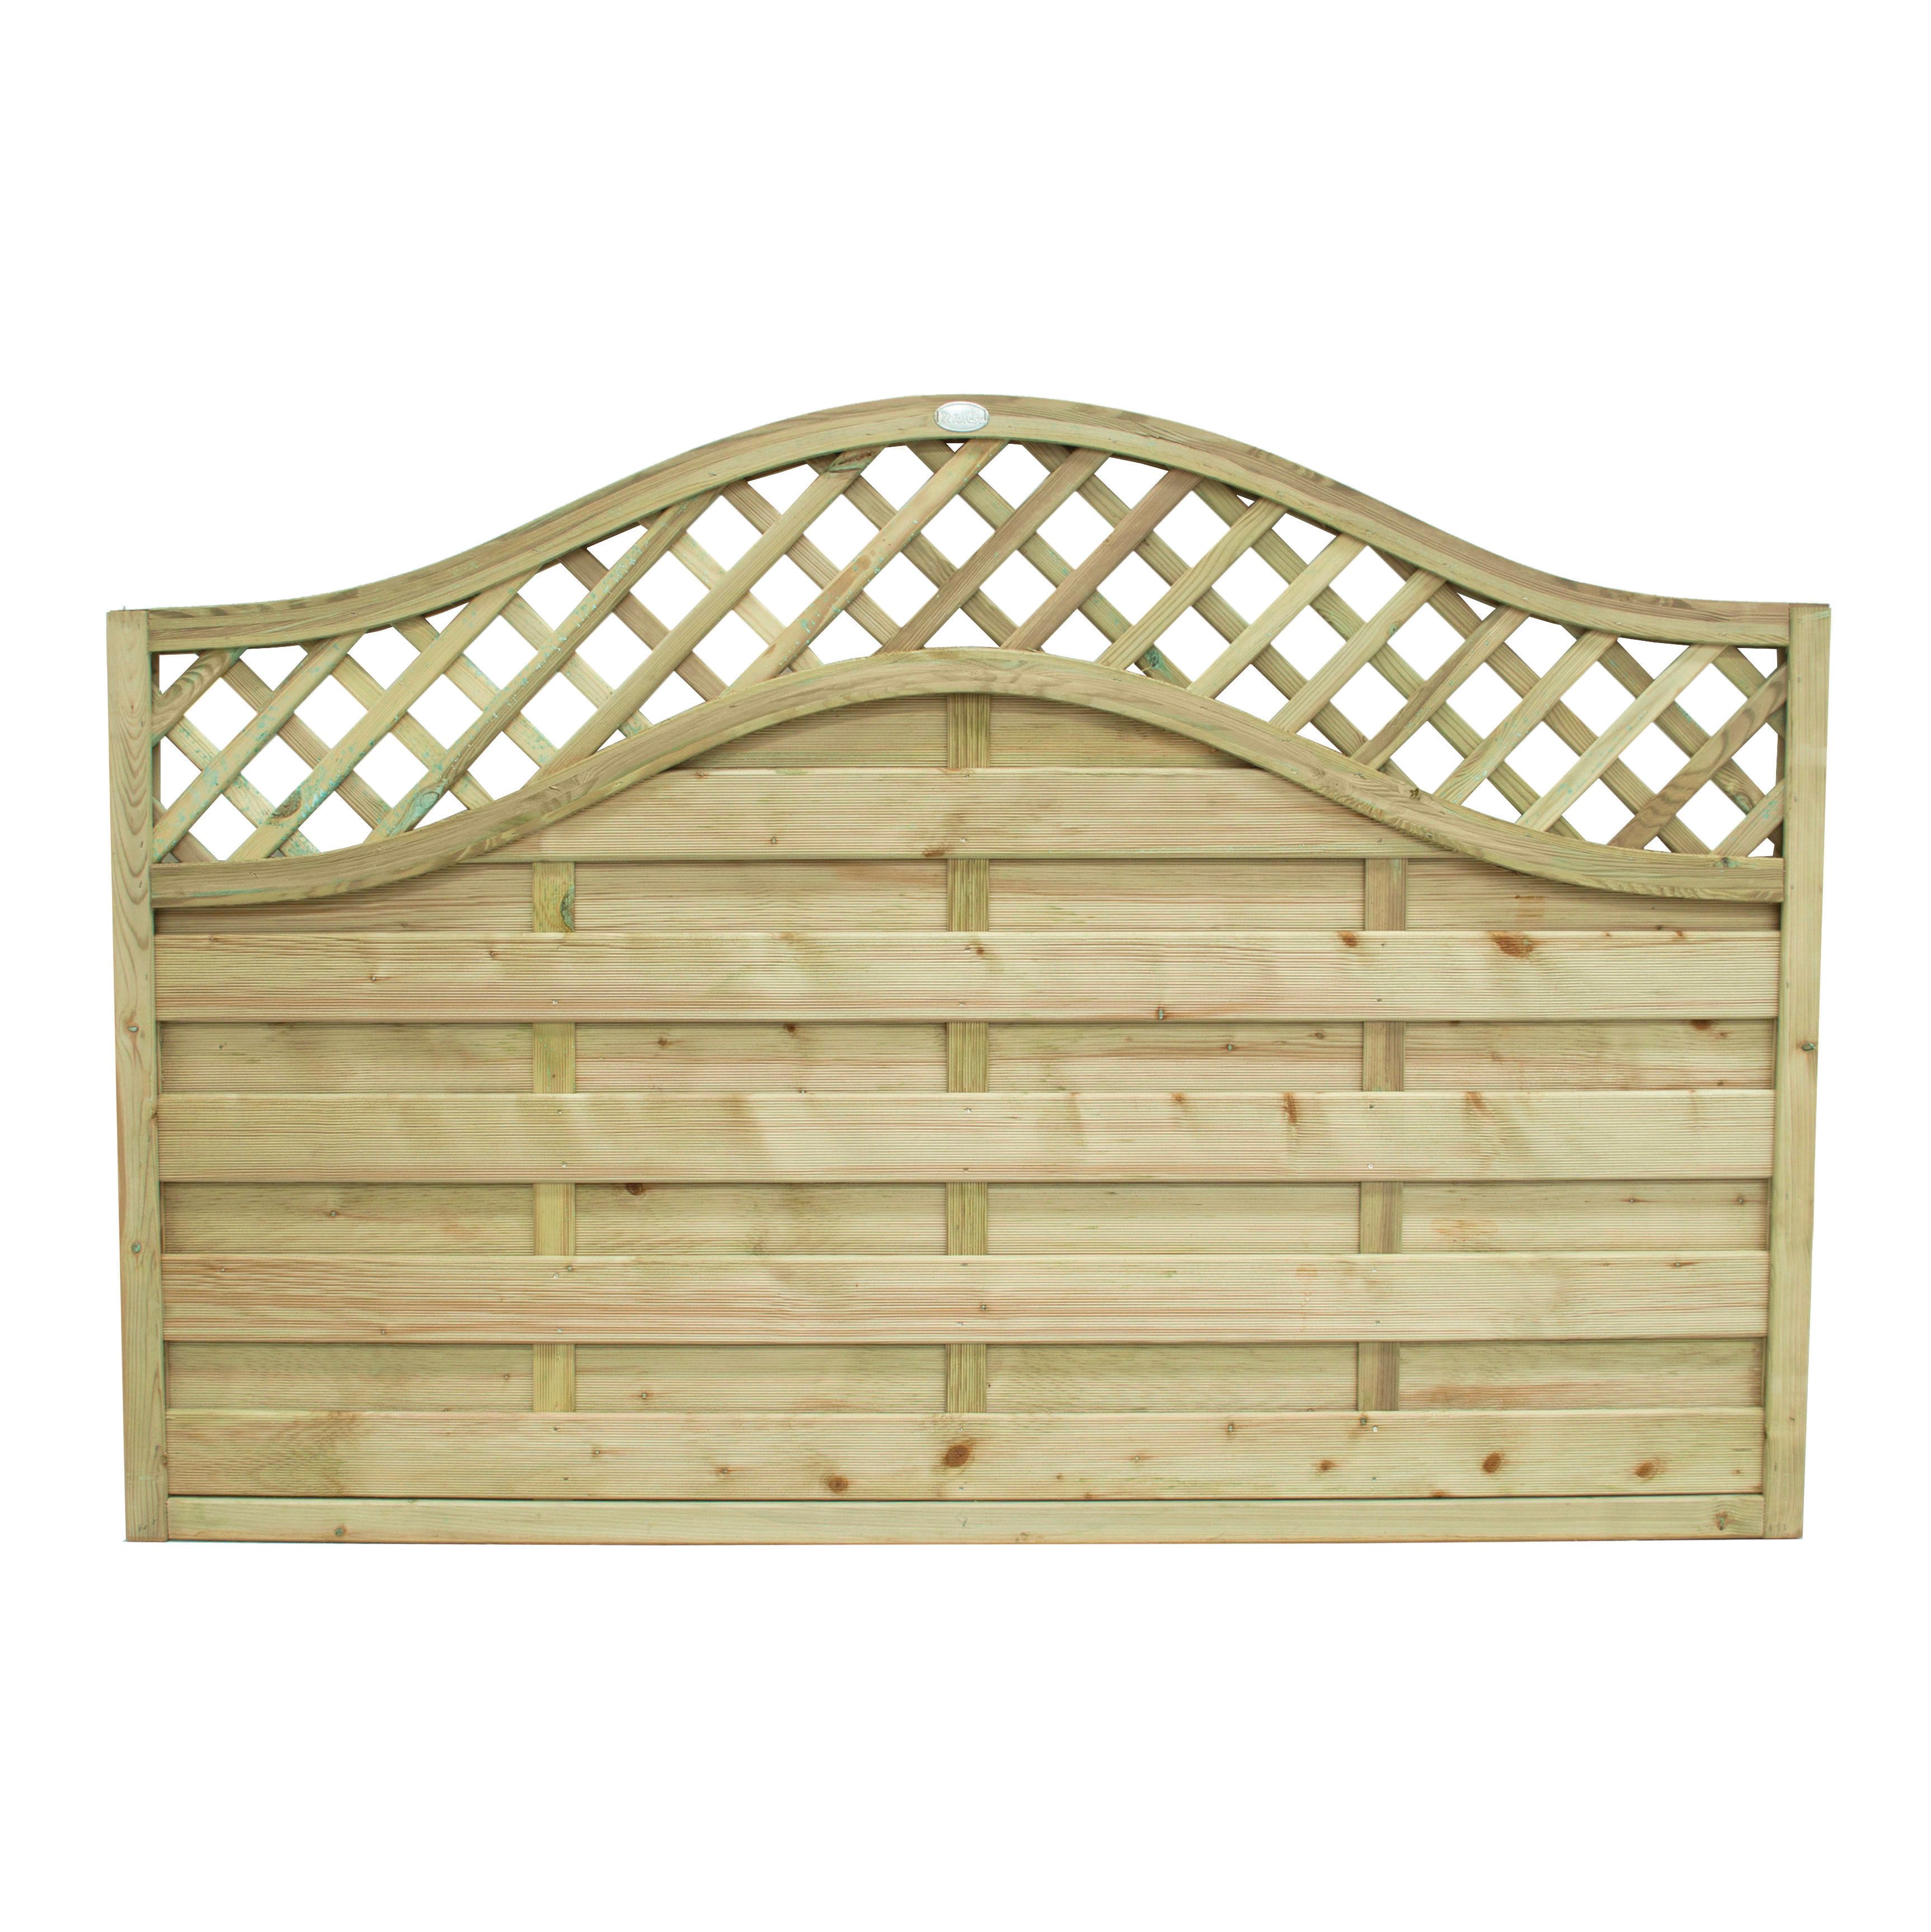 Image of Forest Garden Pressure Treated Bristol Fence Panel - 1800 x 1200mm - 6 x 4ft - Pack of 3